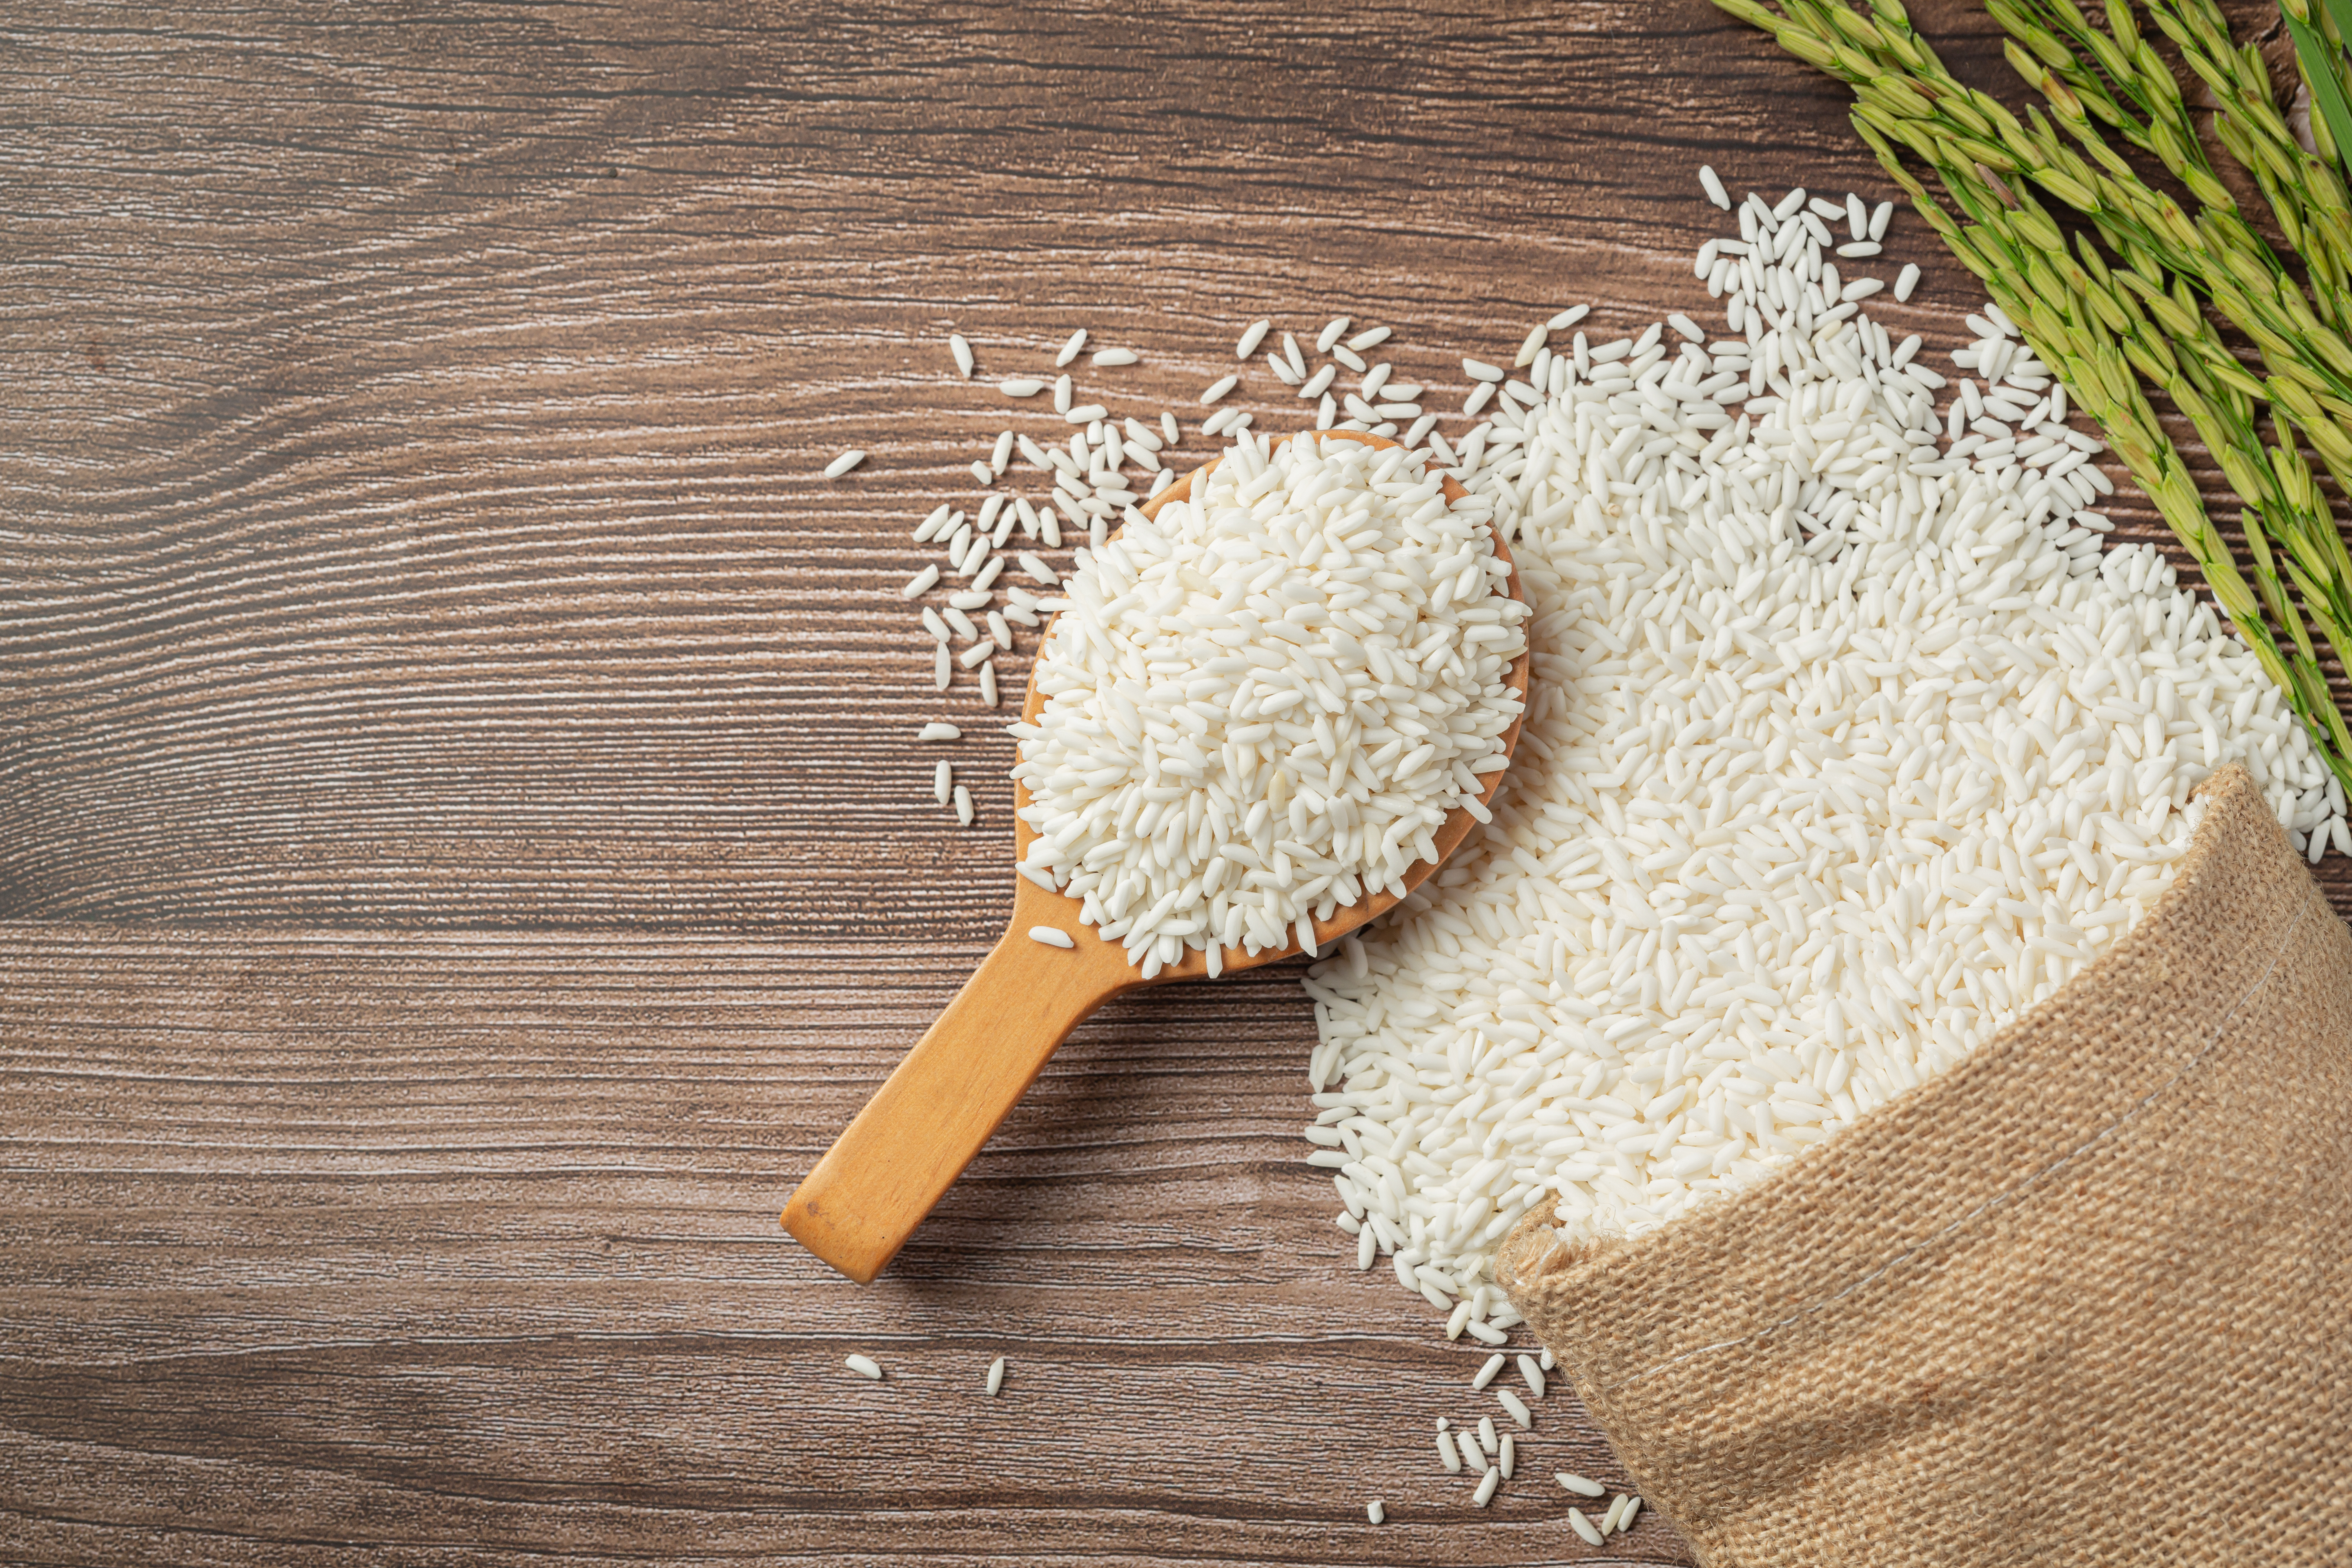 sack-rice-with-rice-wooden-spoon-rice-plant